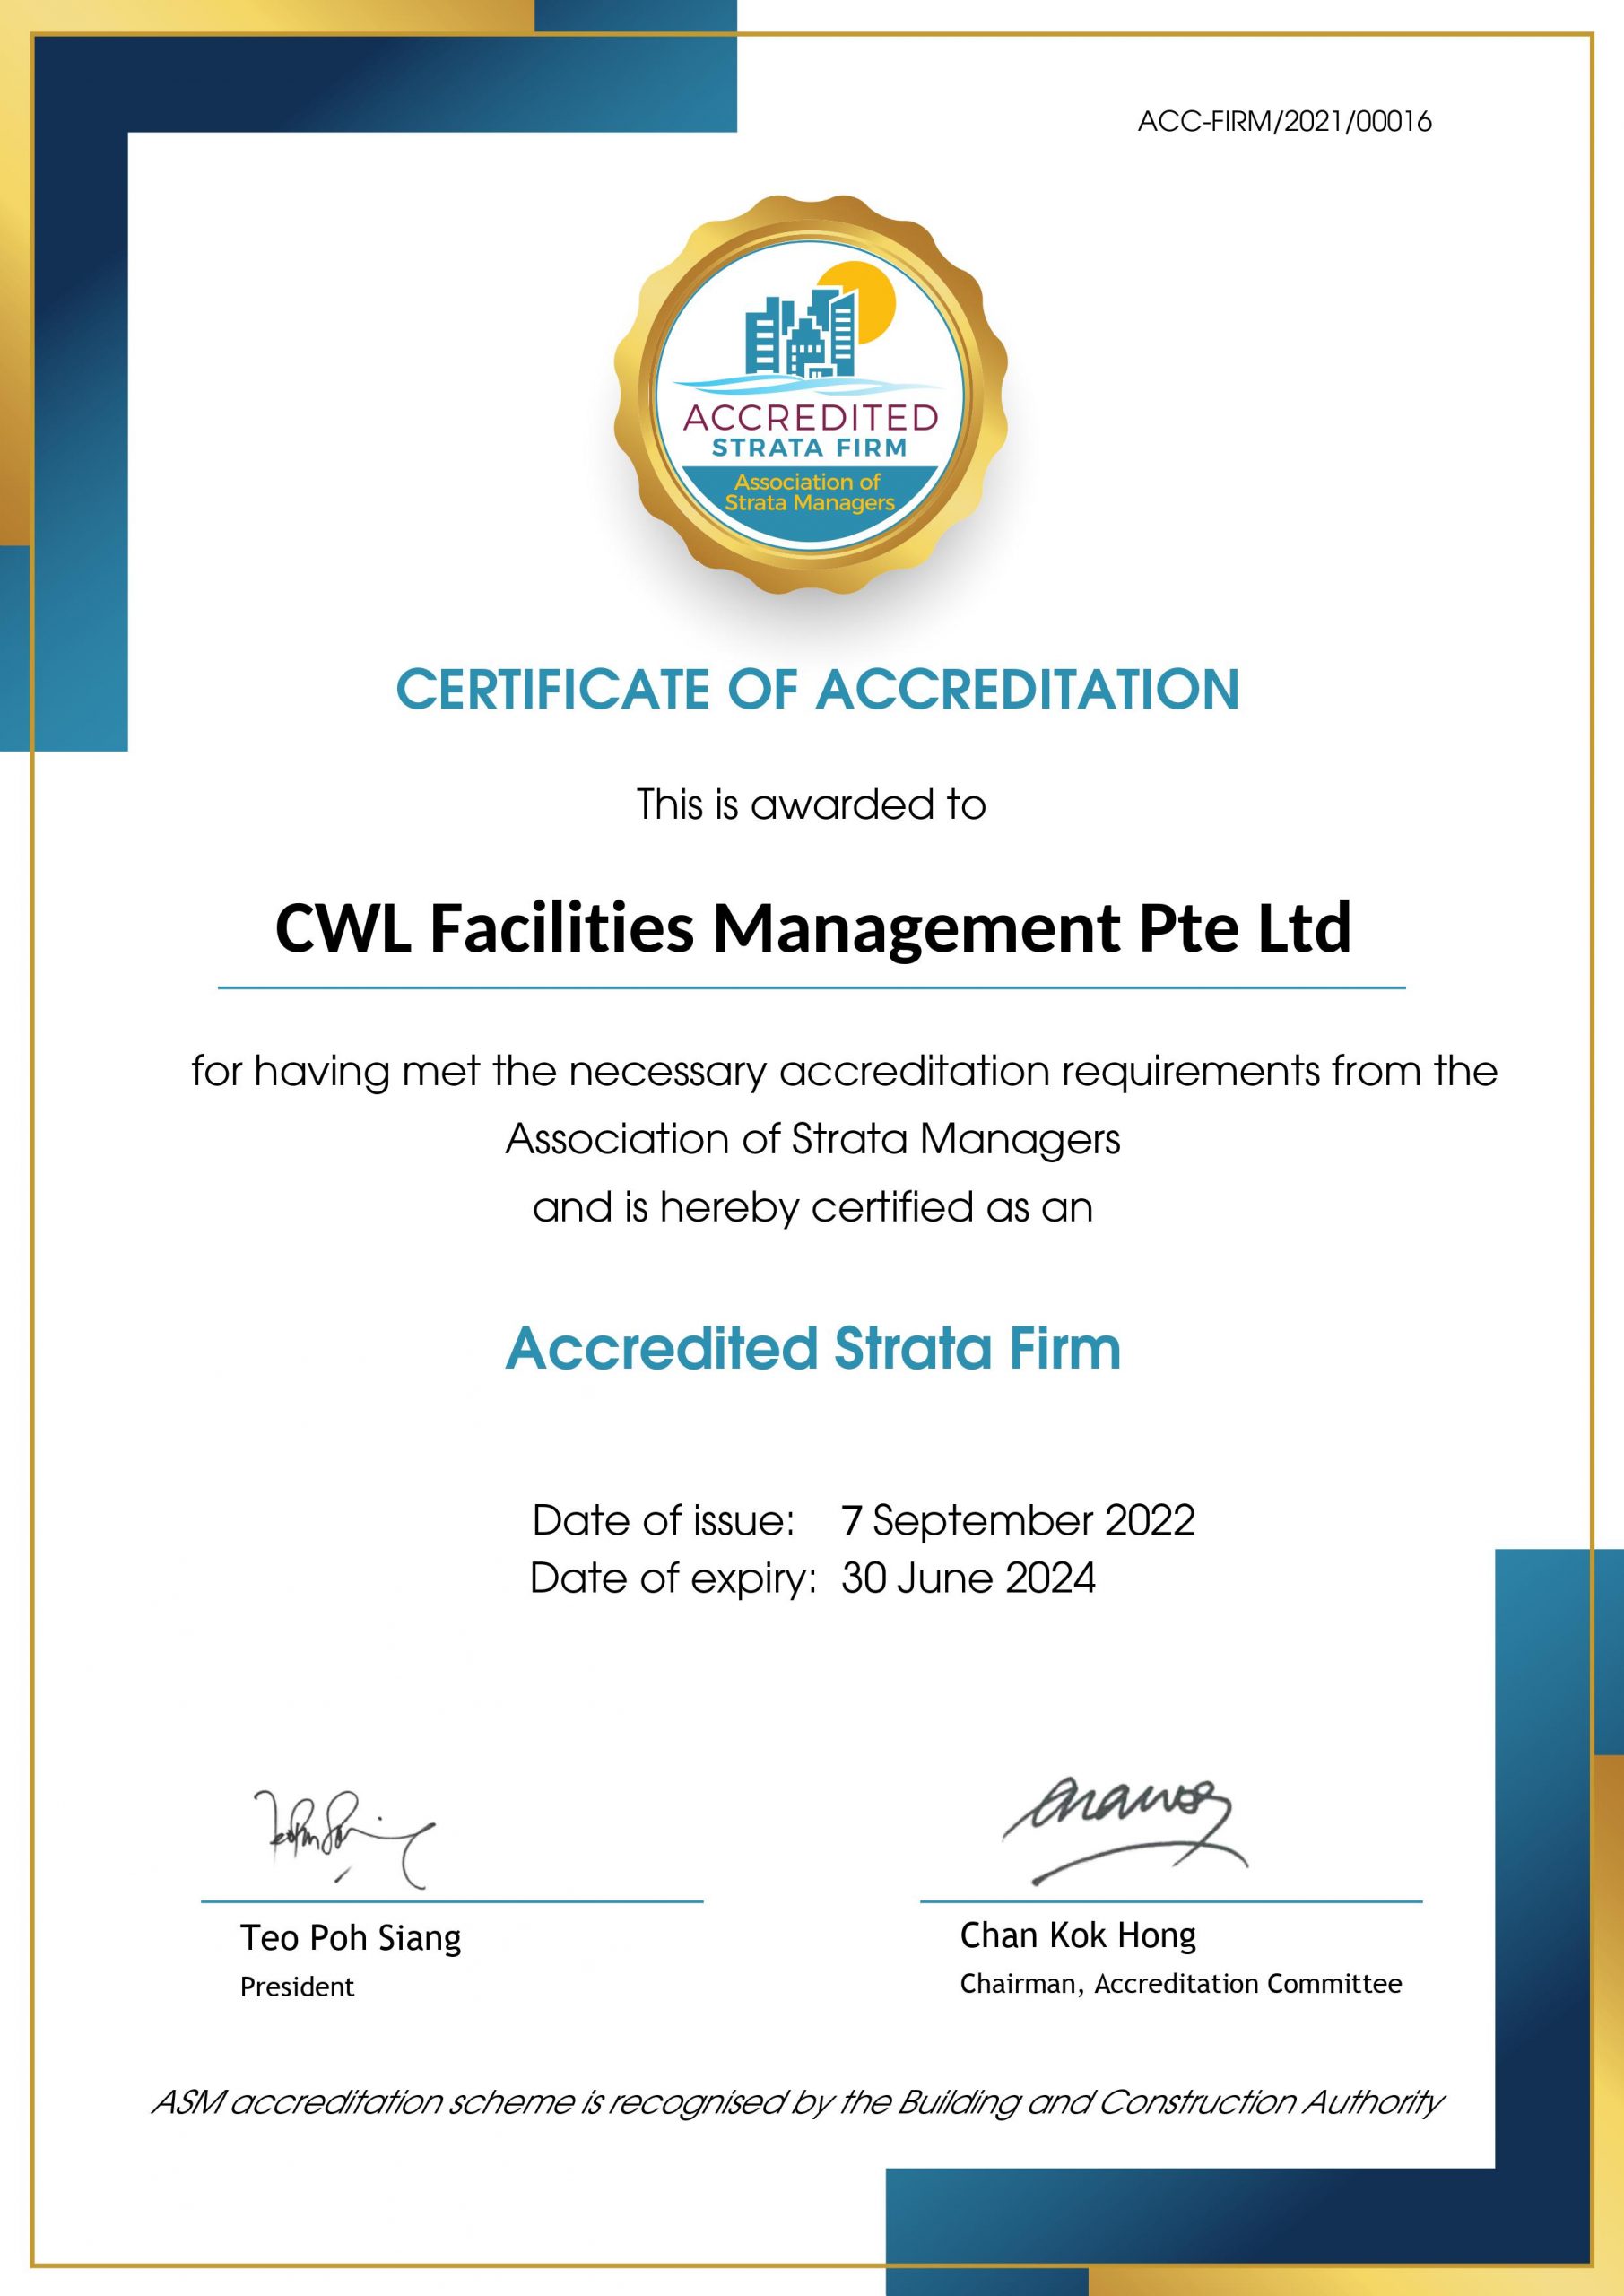 Accredited Strata Firm